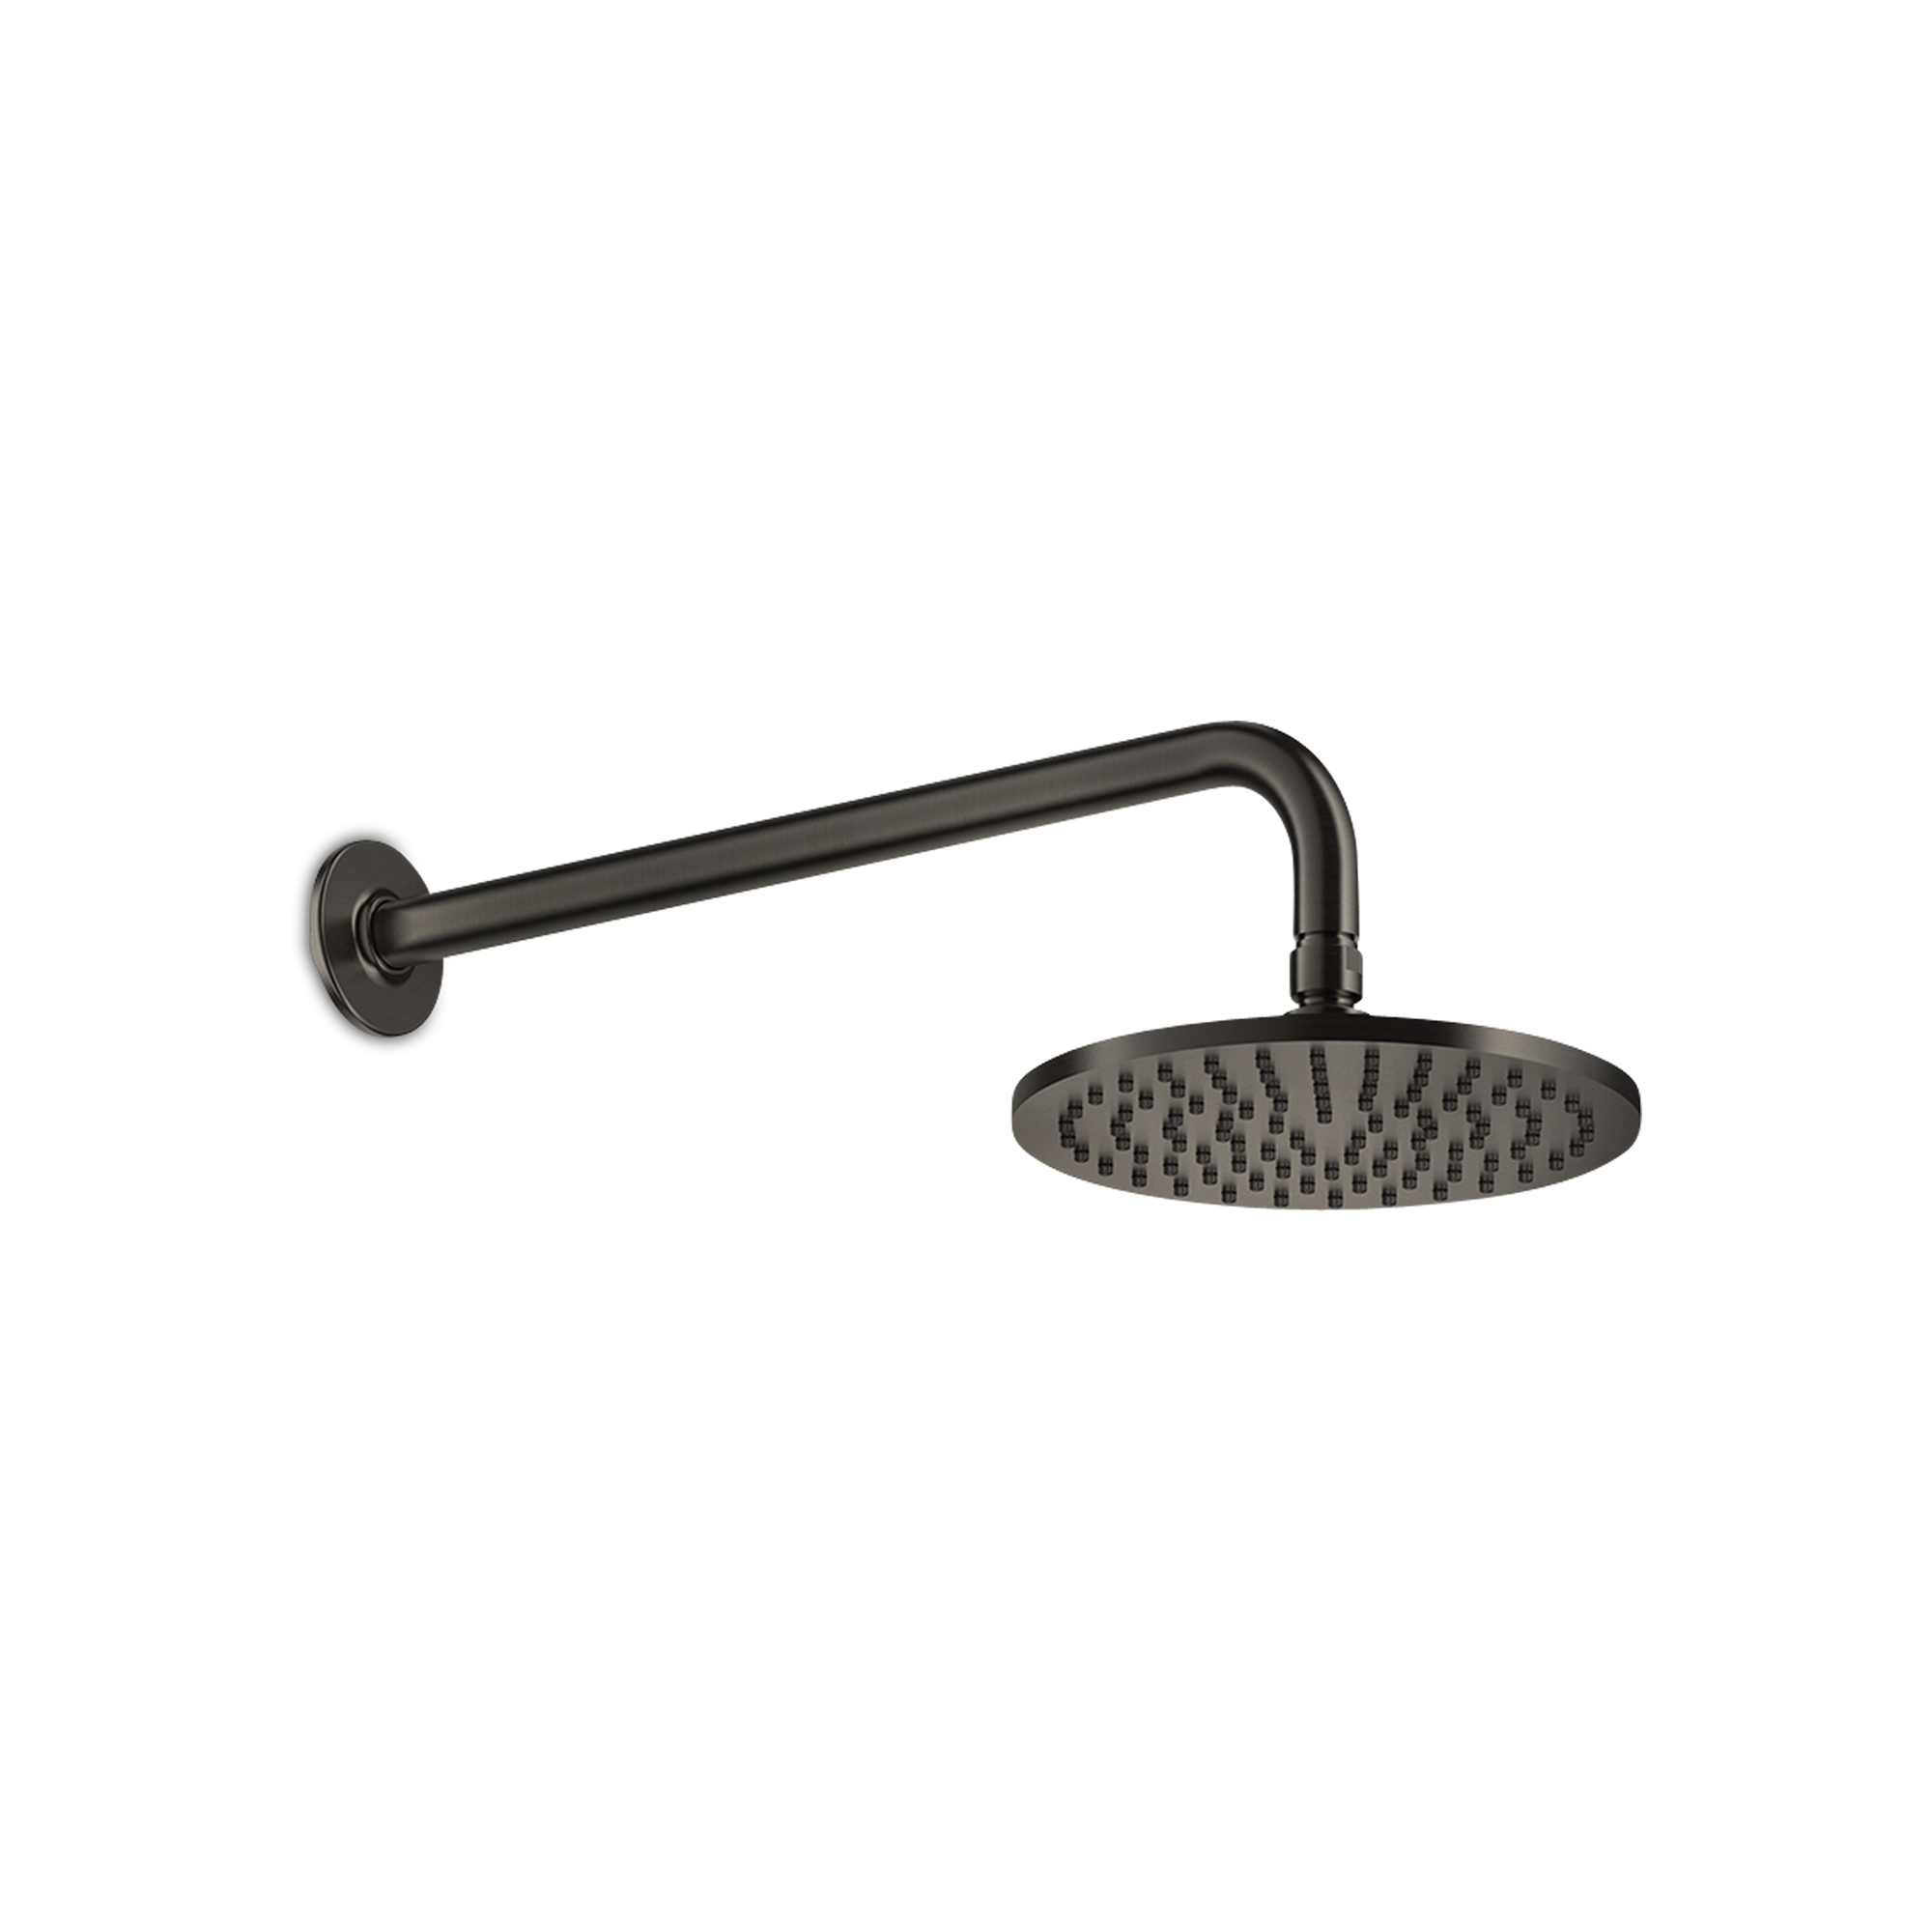 A circular wall mounted showerhead with gentle curves and an industrial vibe.